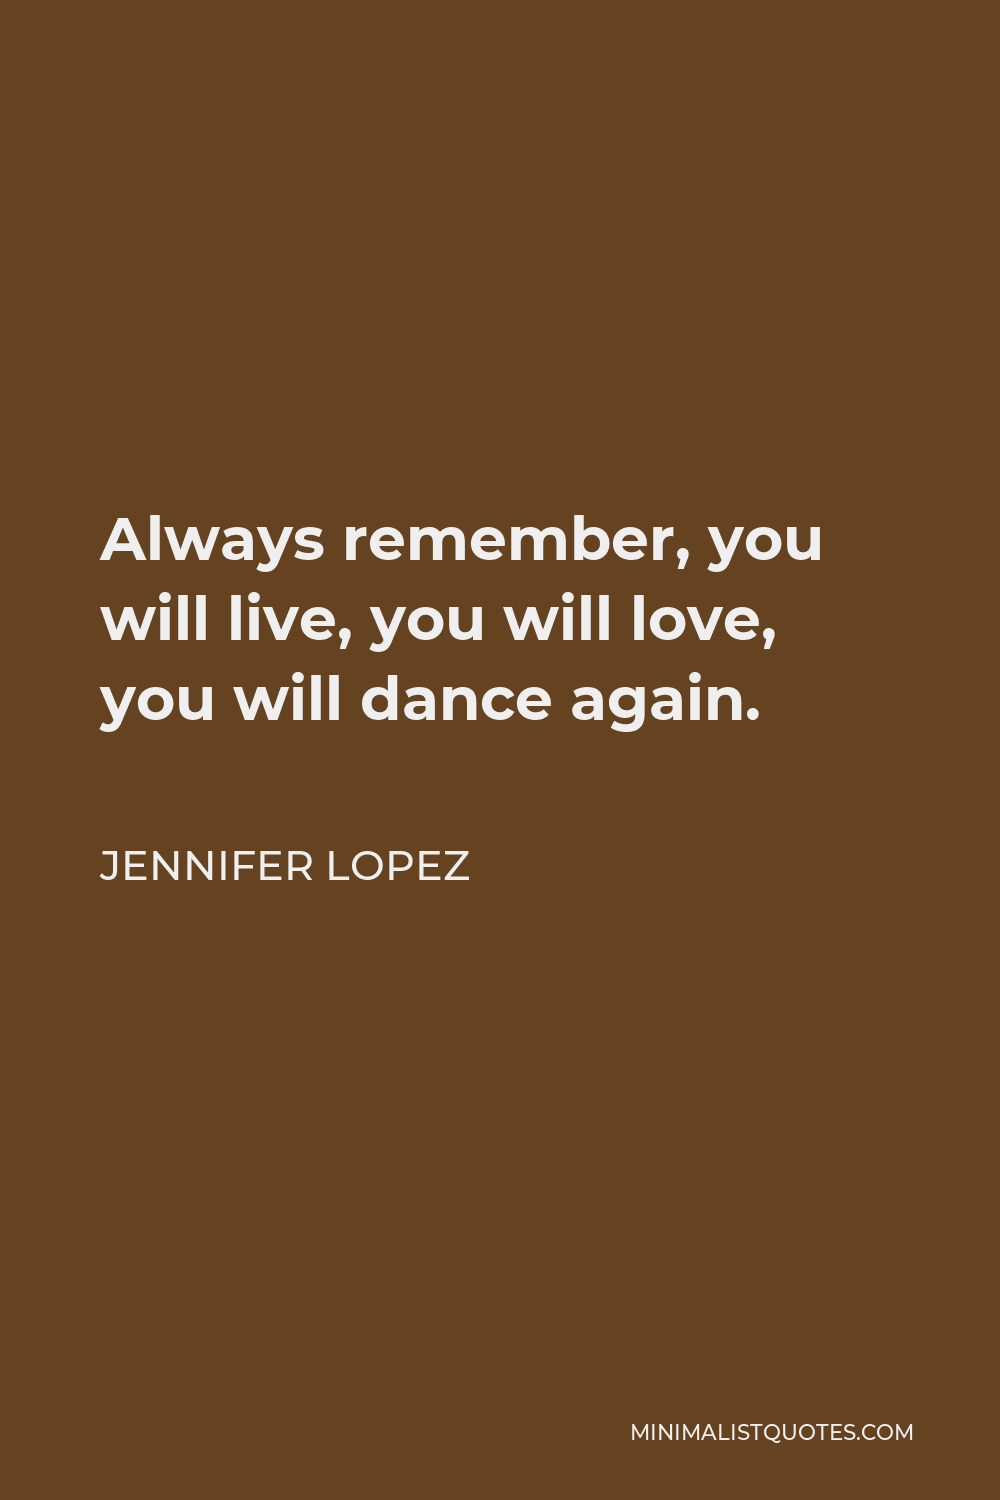 Jennifer Lopez Quote - Always remember, you will live, you will love, you will dance again.